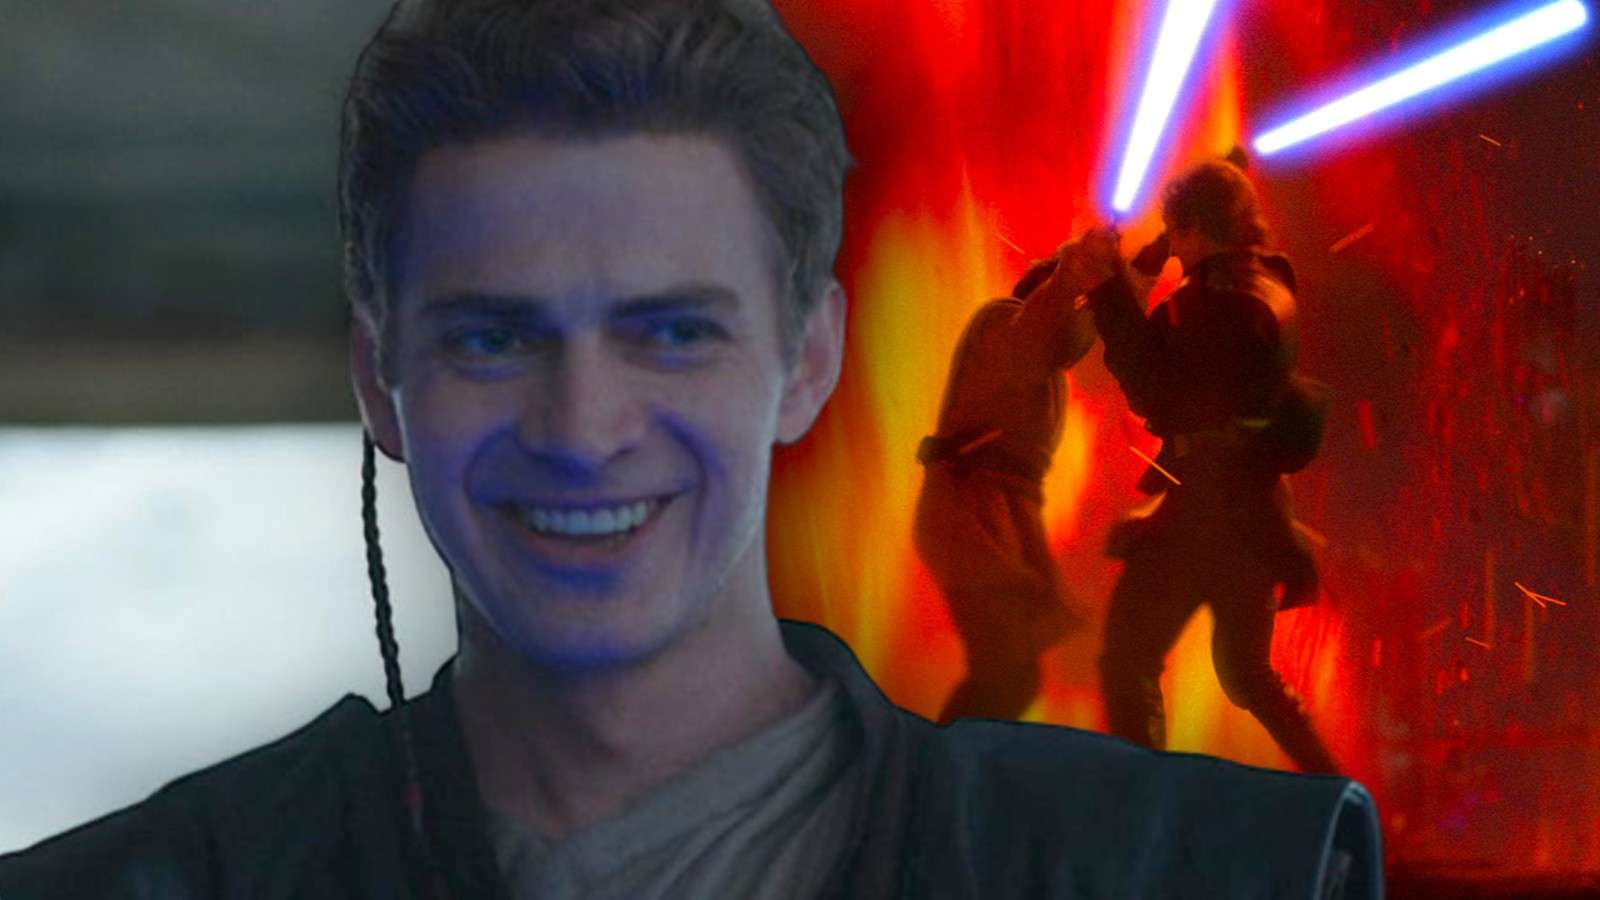 Hayden Christensen as Anakin Skywalker and the Mustafar duel from Revenge of the Sith